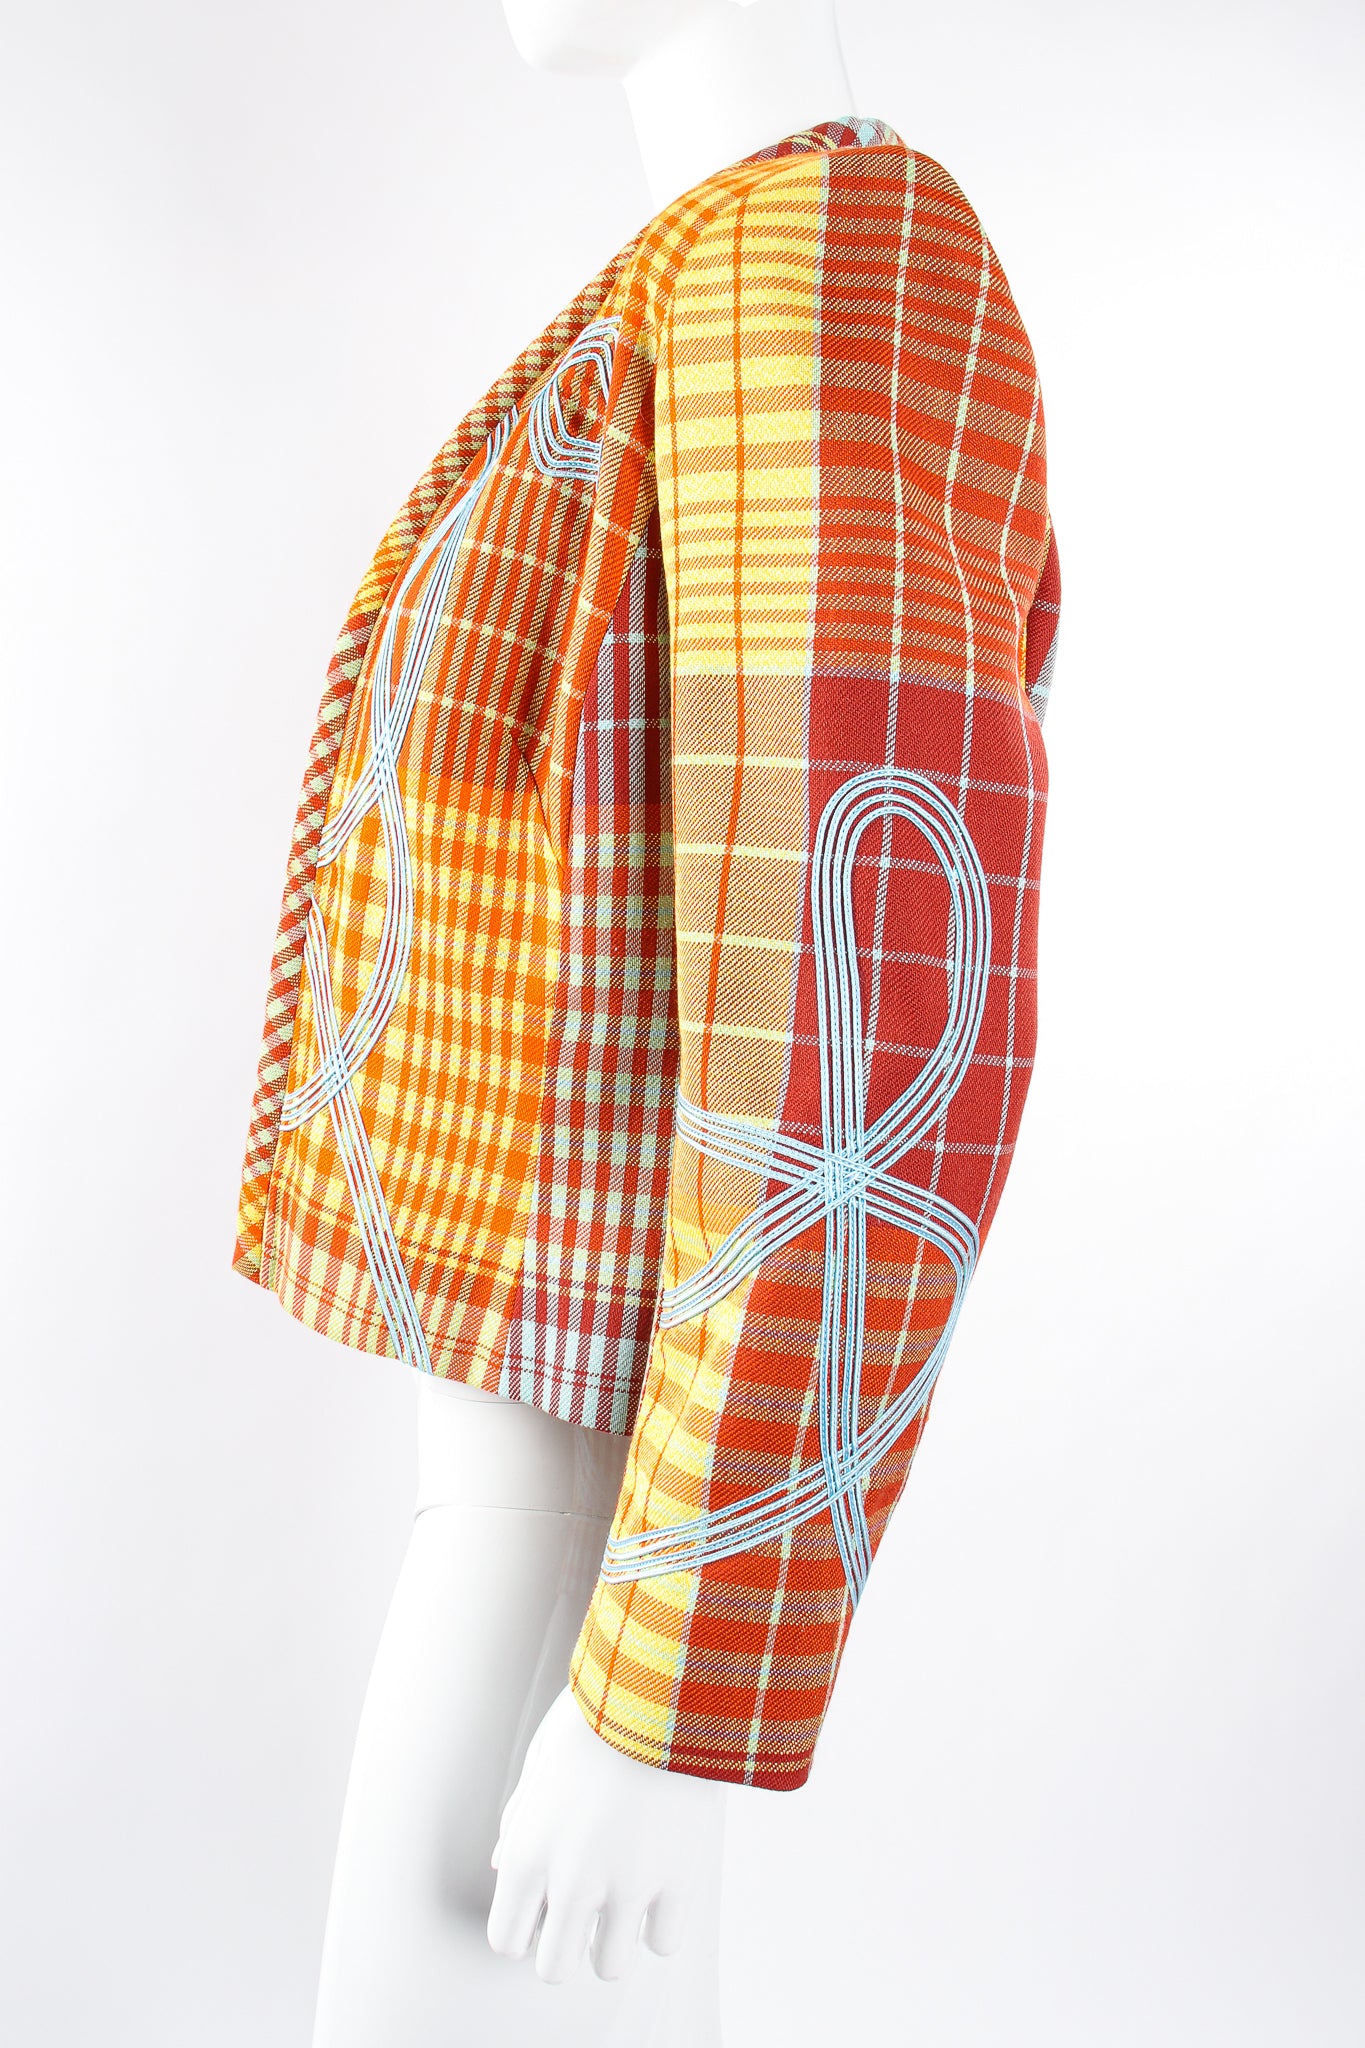 Vintage Christian Lacroix Madras Check Jacket on Mannequin sleeve at Recess Los Angeles